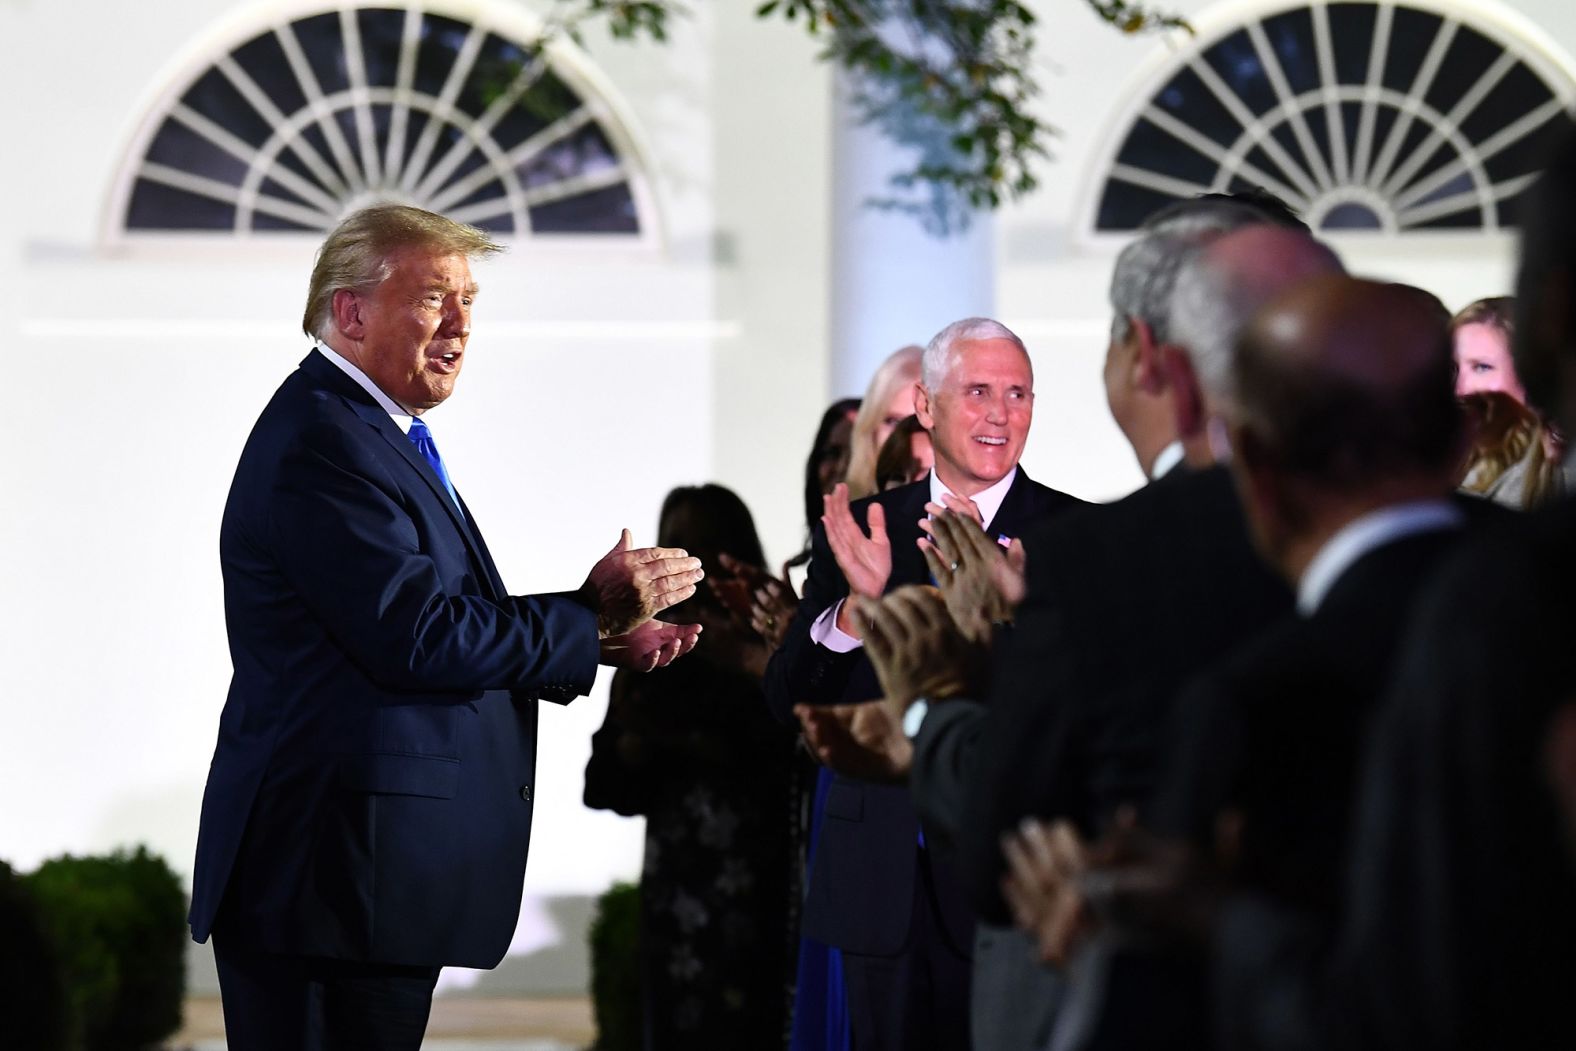 President Trump, alongside Vice President Mike Pence, arrives at the Rose Garden for his wife's speech.